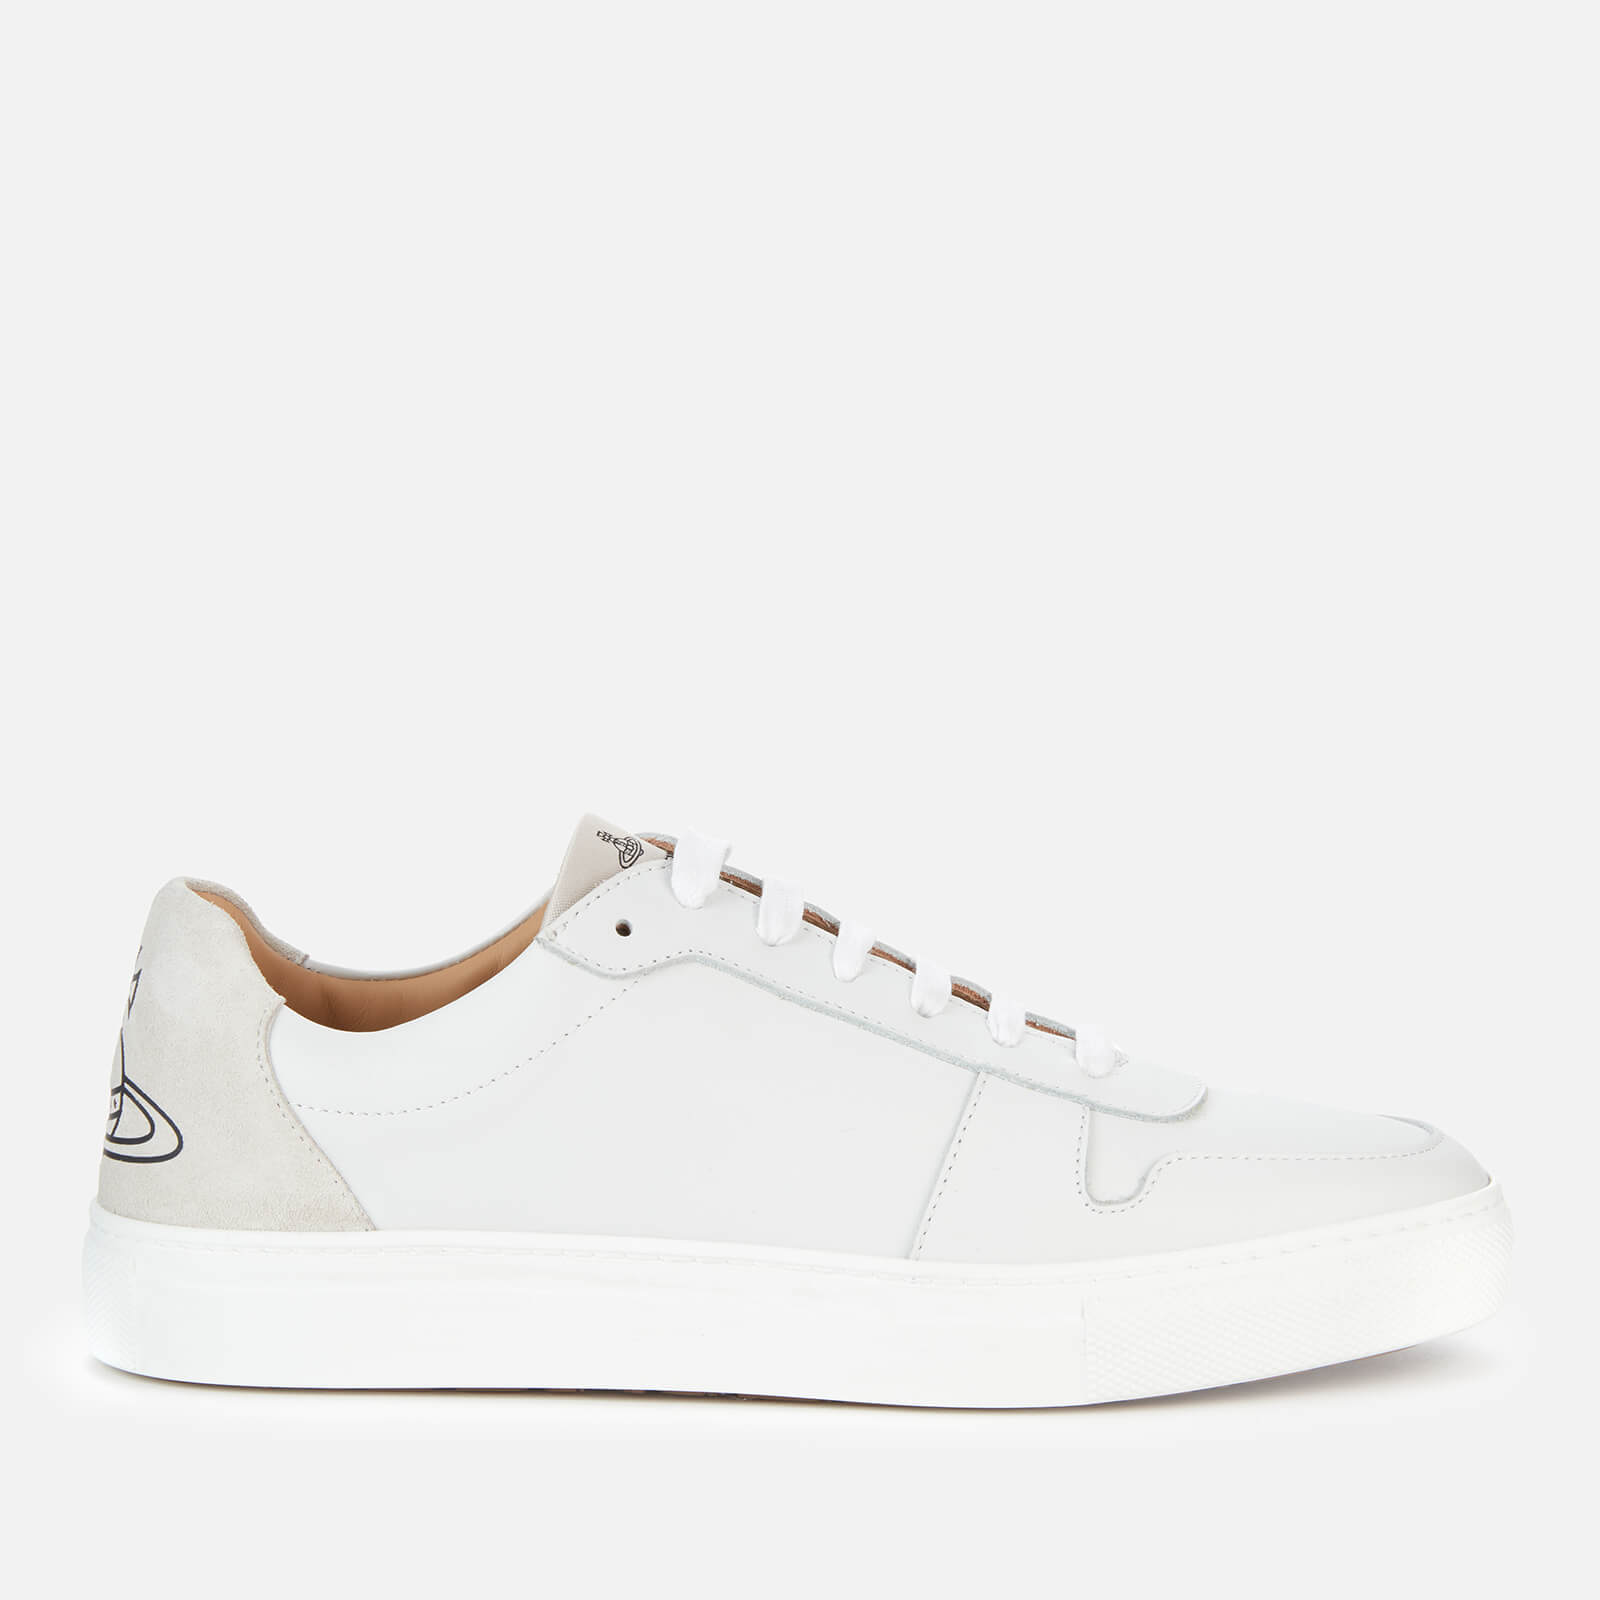 Vivienne Westwood Women's Apollo Leather Cupsole Trainers - White - UK 3